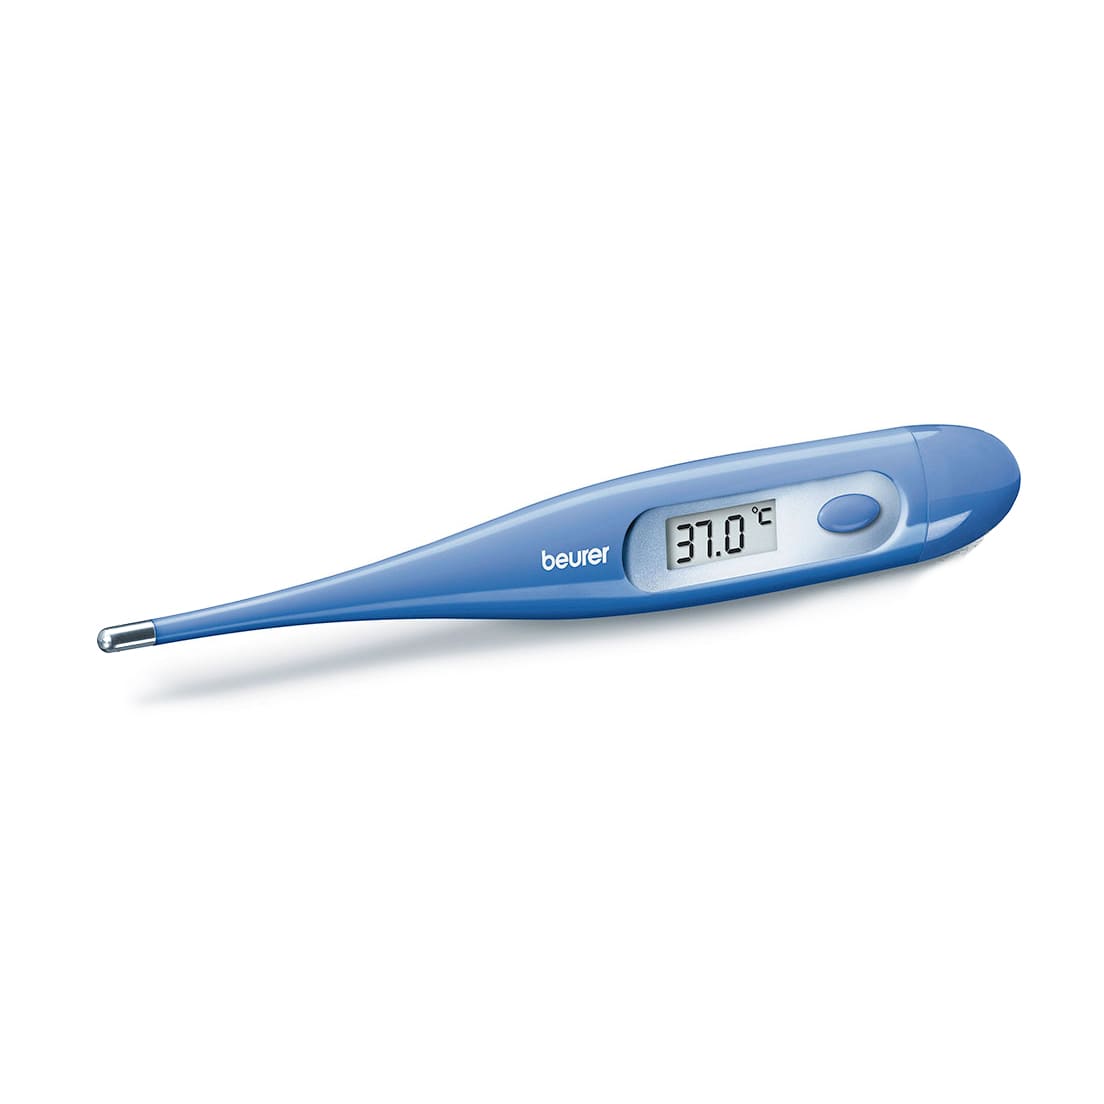 Beurer Digital Clinical Thermometer - FT09 - Bloom Pharmacy